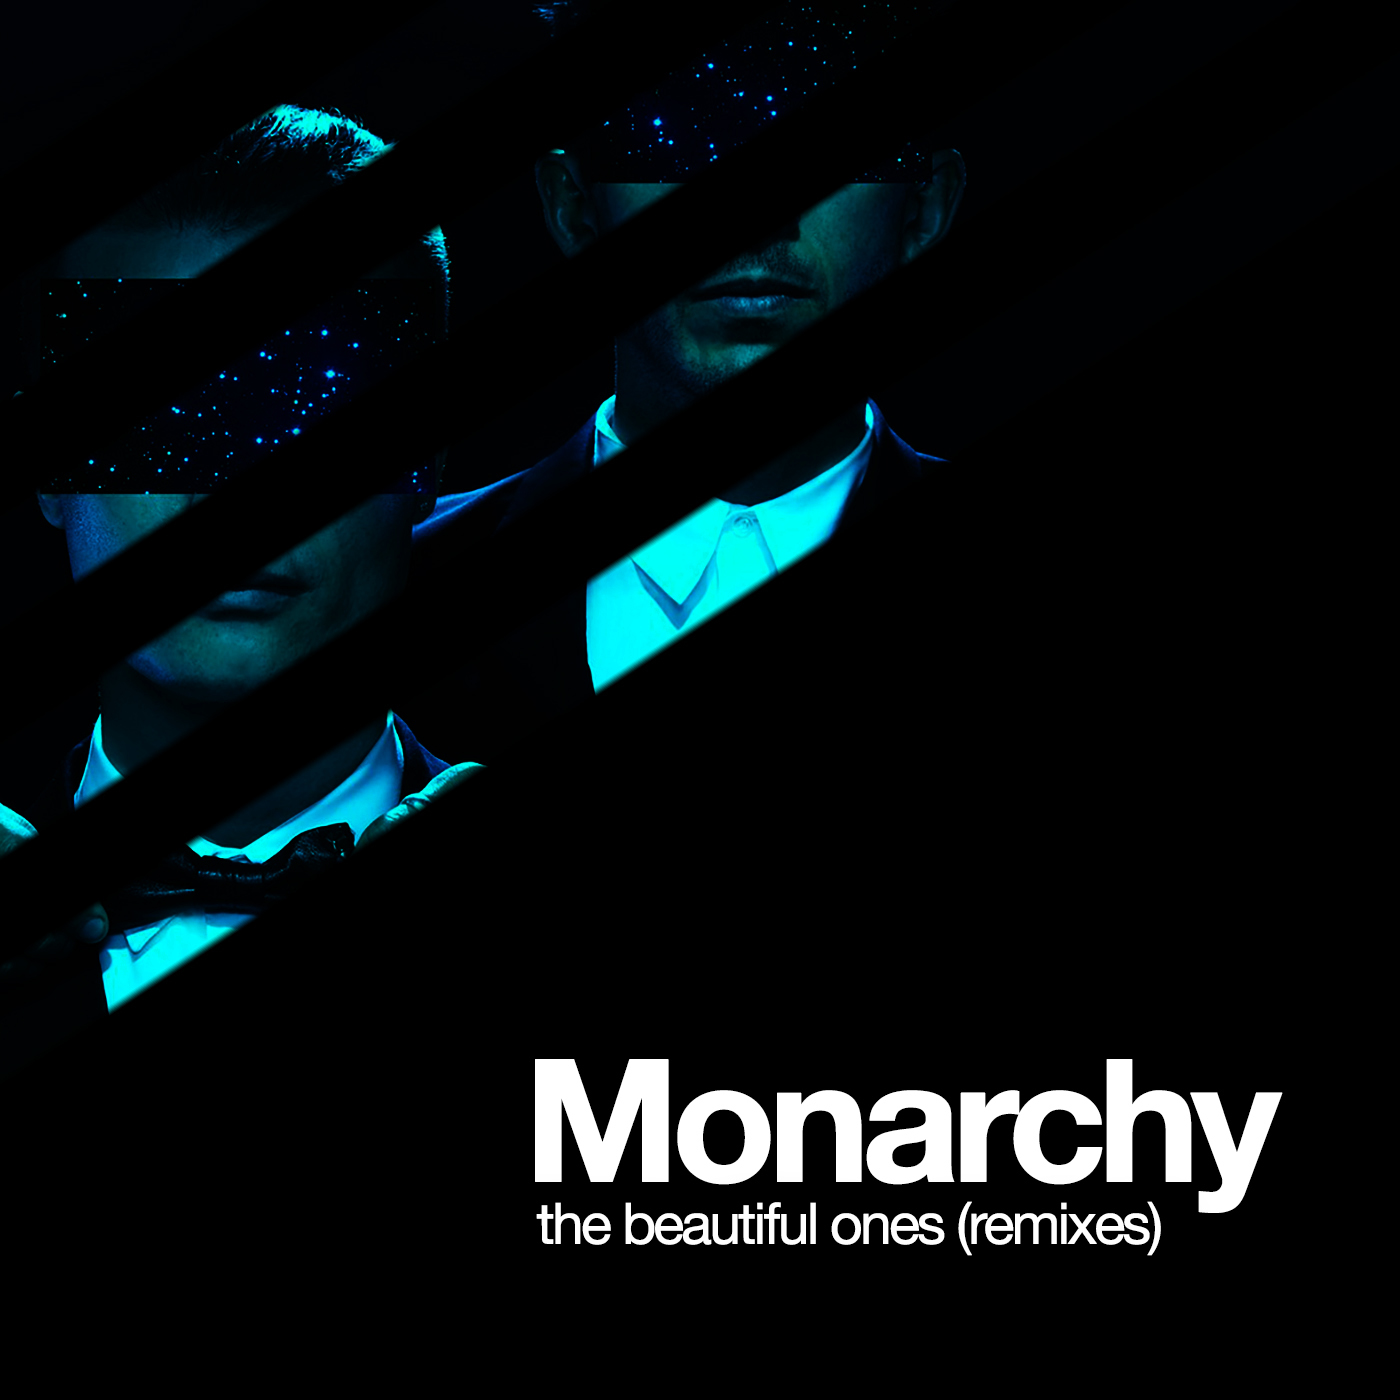 We are beautiful ones. Monarchy - the beautiful ones обложка. DJ favorite Official Remixes. Album Art Music Monarchy - the beautiful ones (Astero Radio Remix).